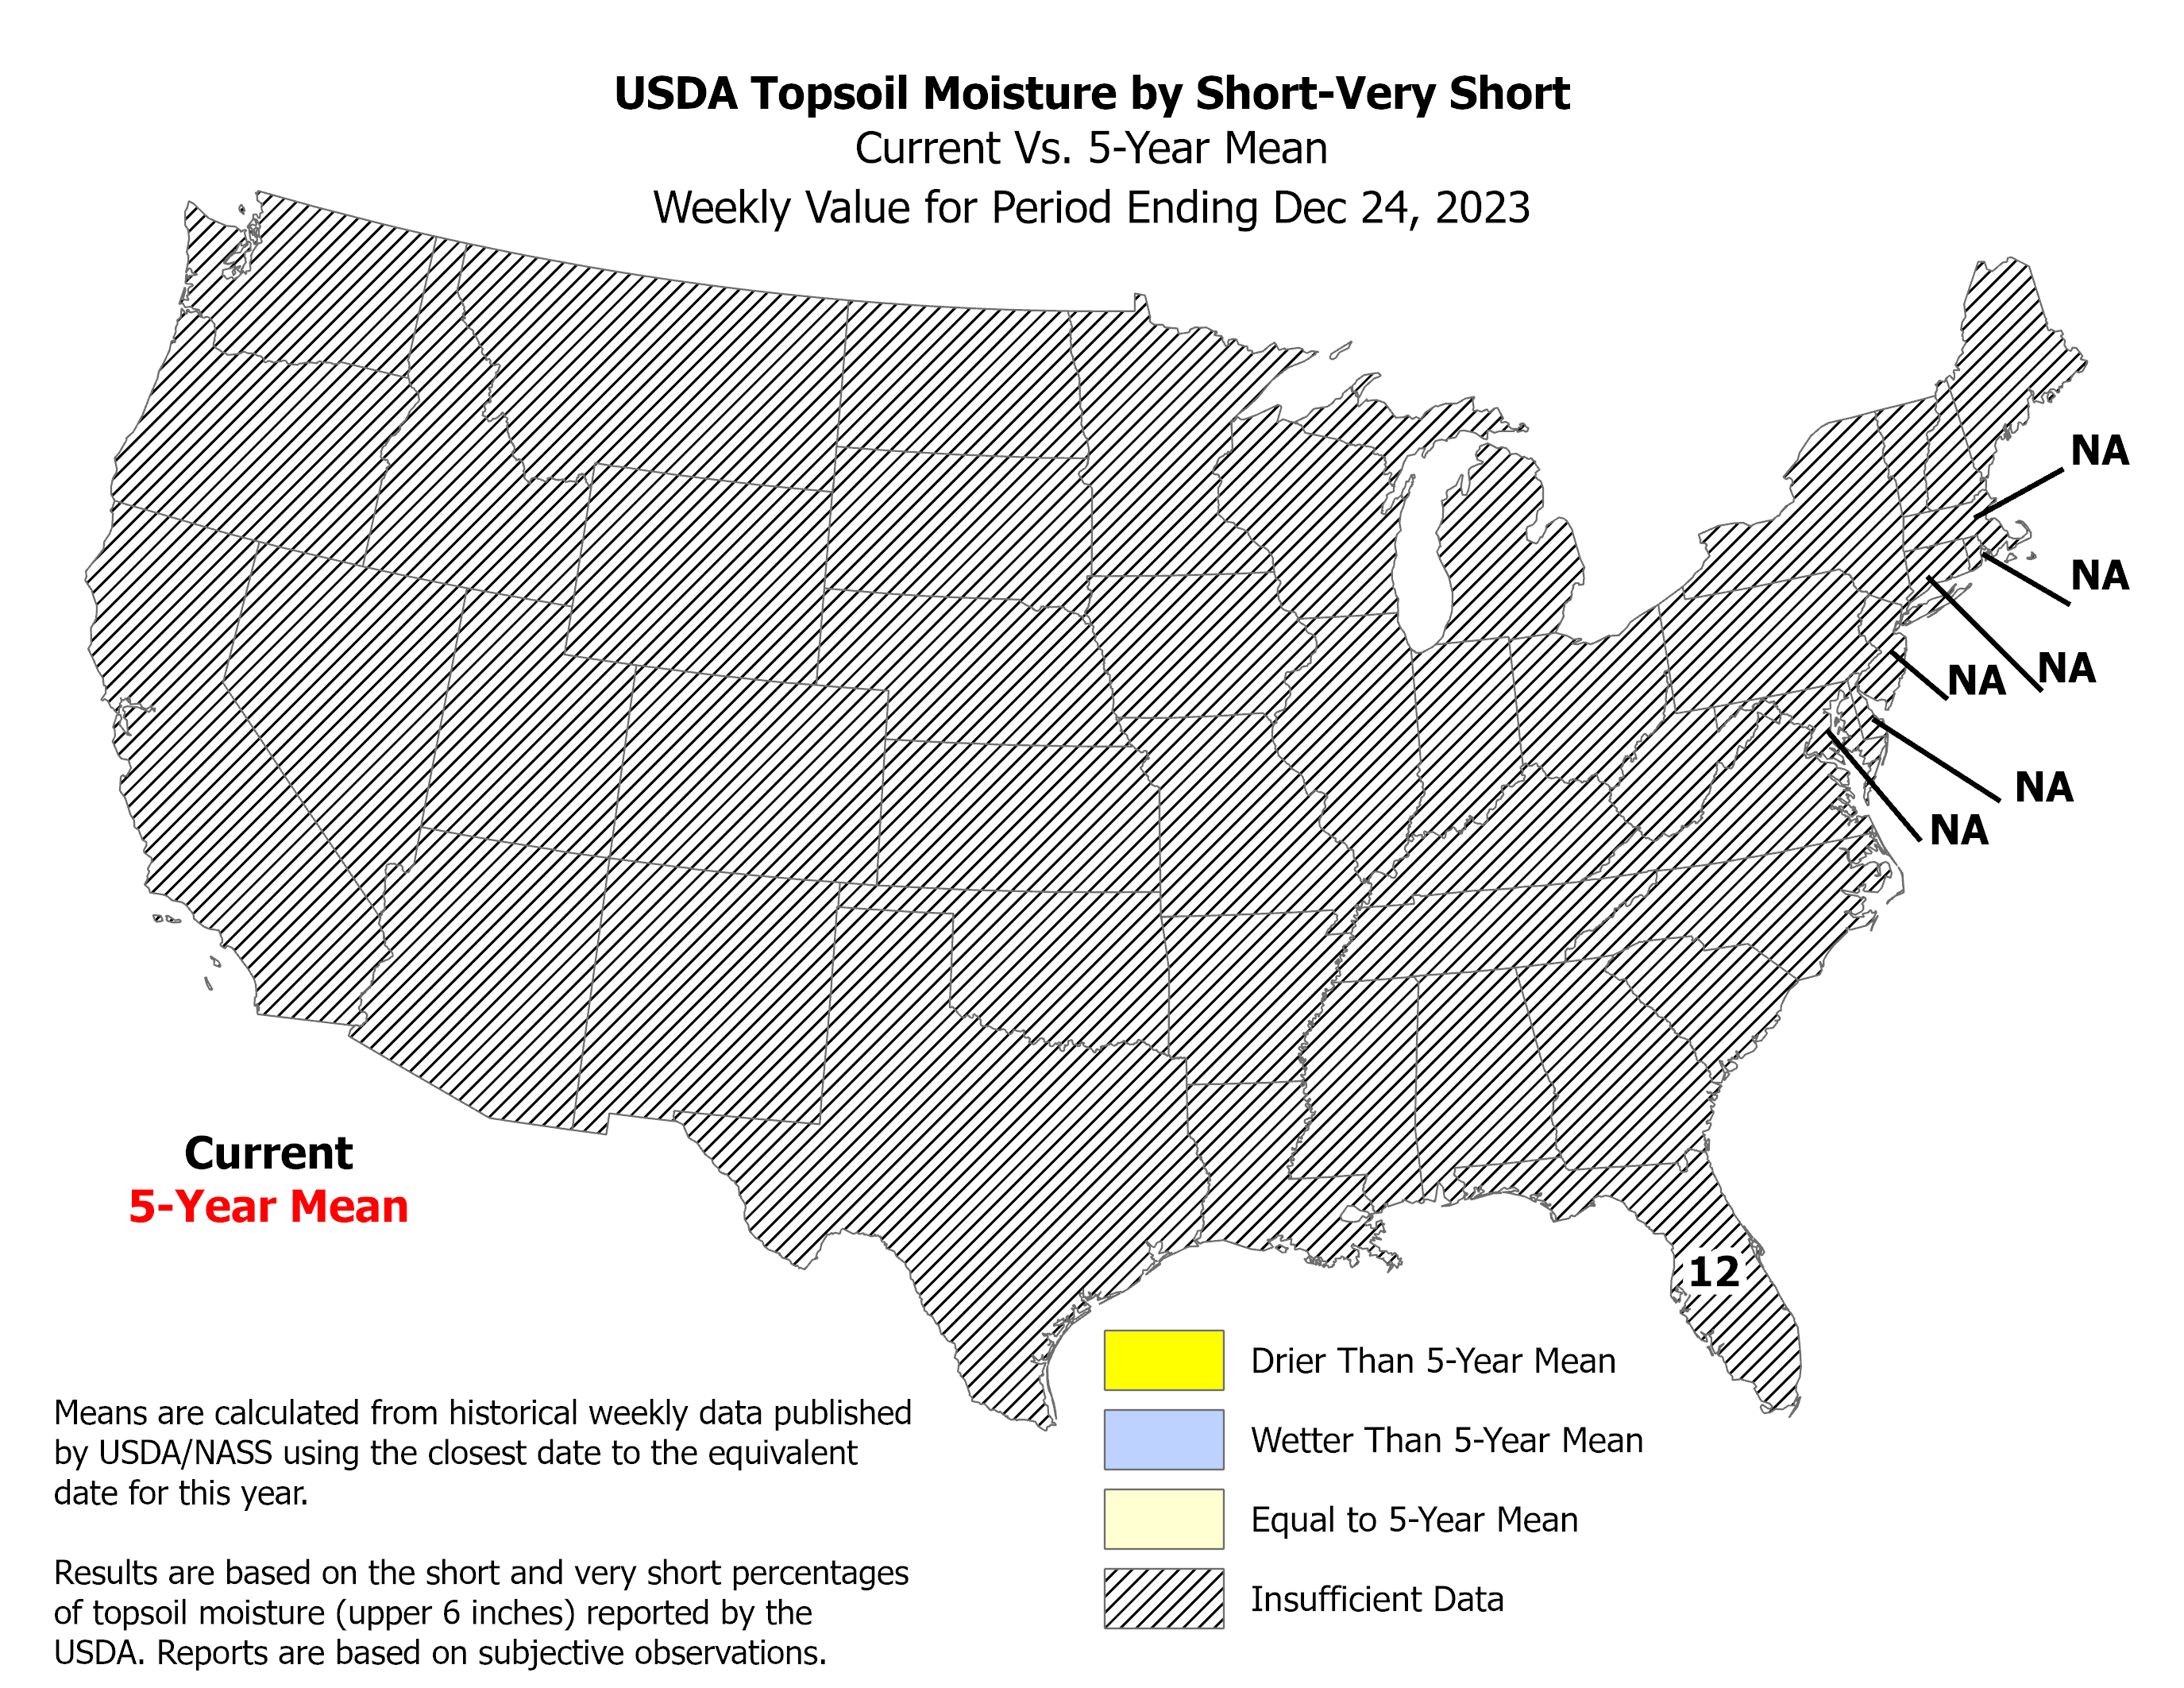 USDA Topsoil Moisture by Short-VeryShort, current vs 5 year mean